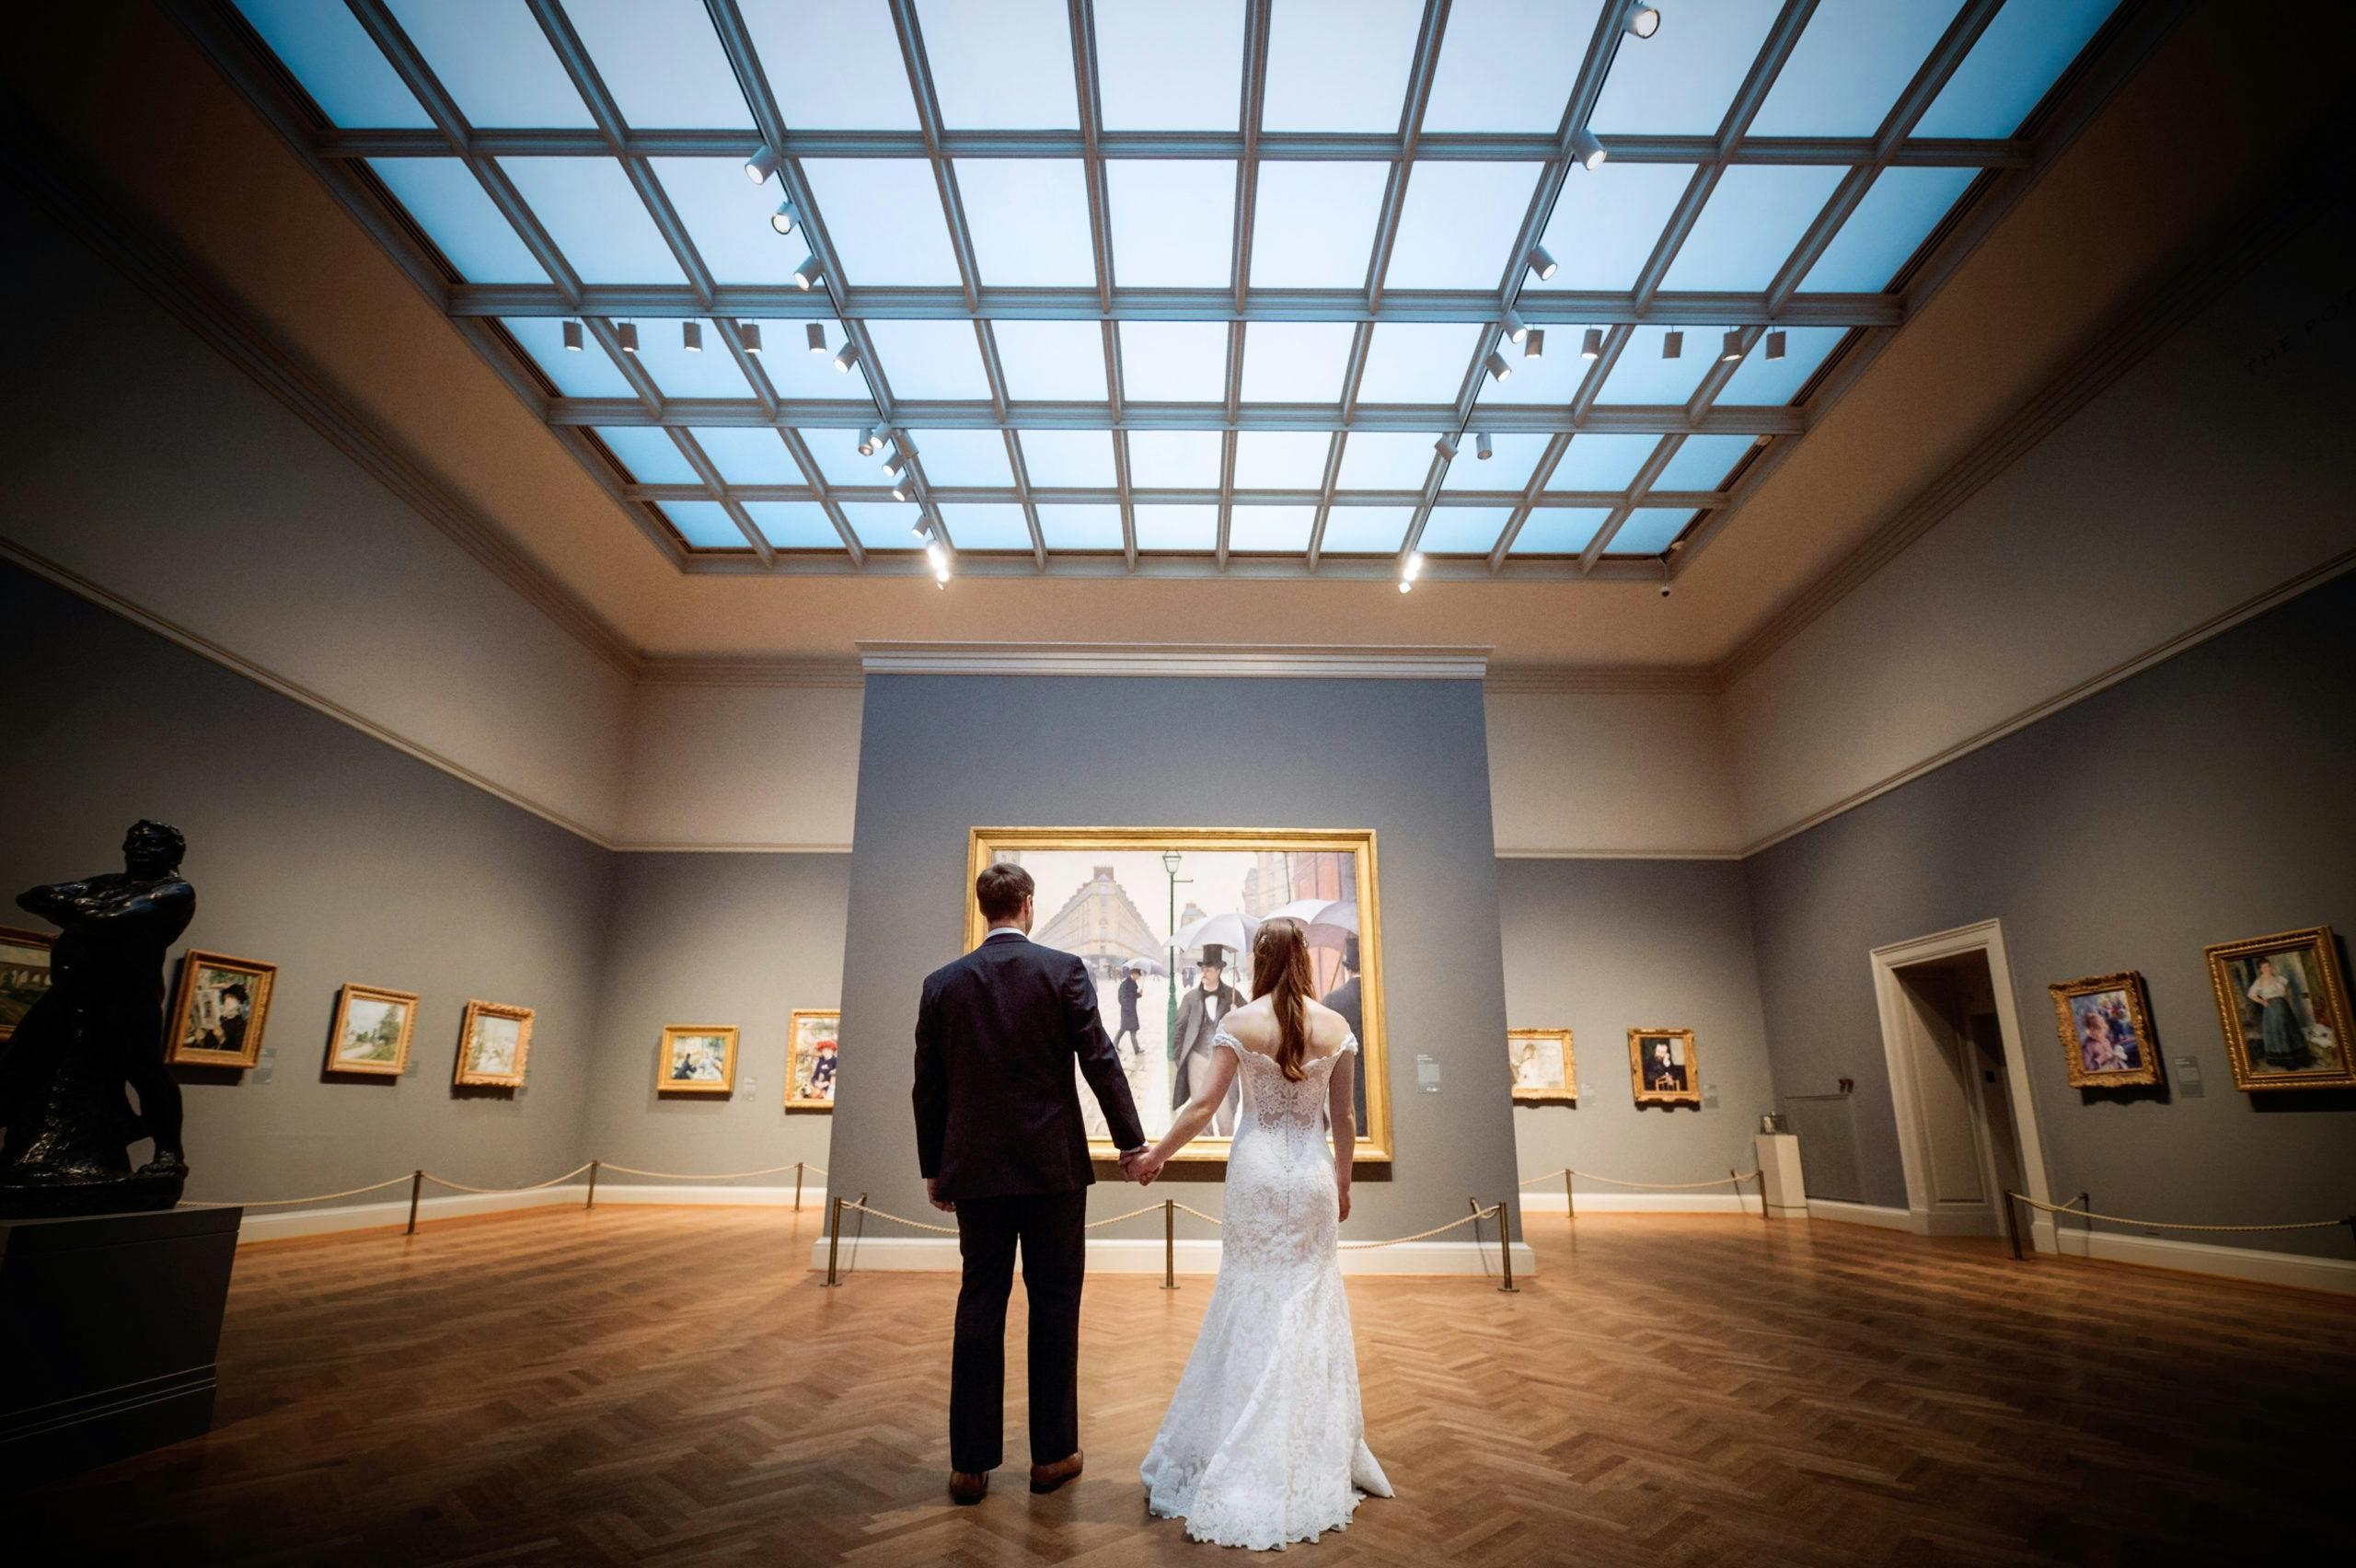 Shot of bride and groom from behind looking at art in museum | PartySlate